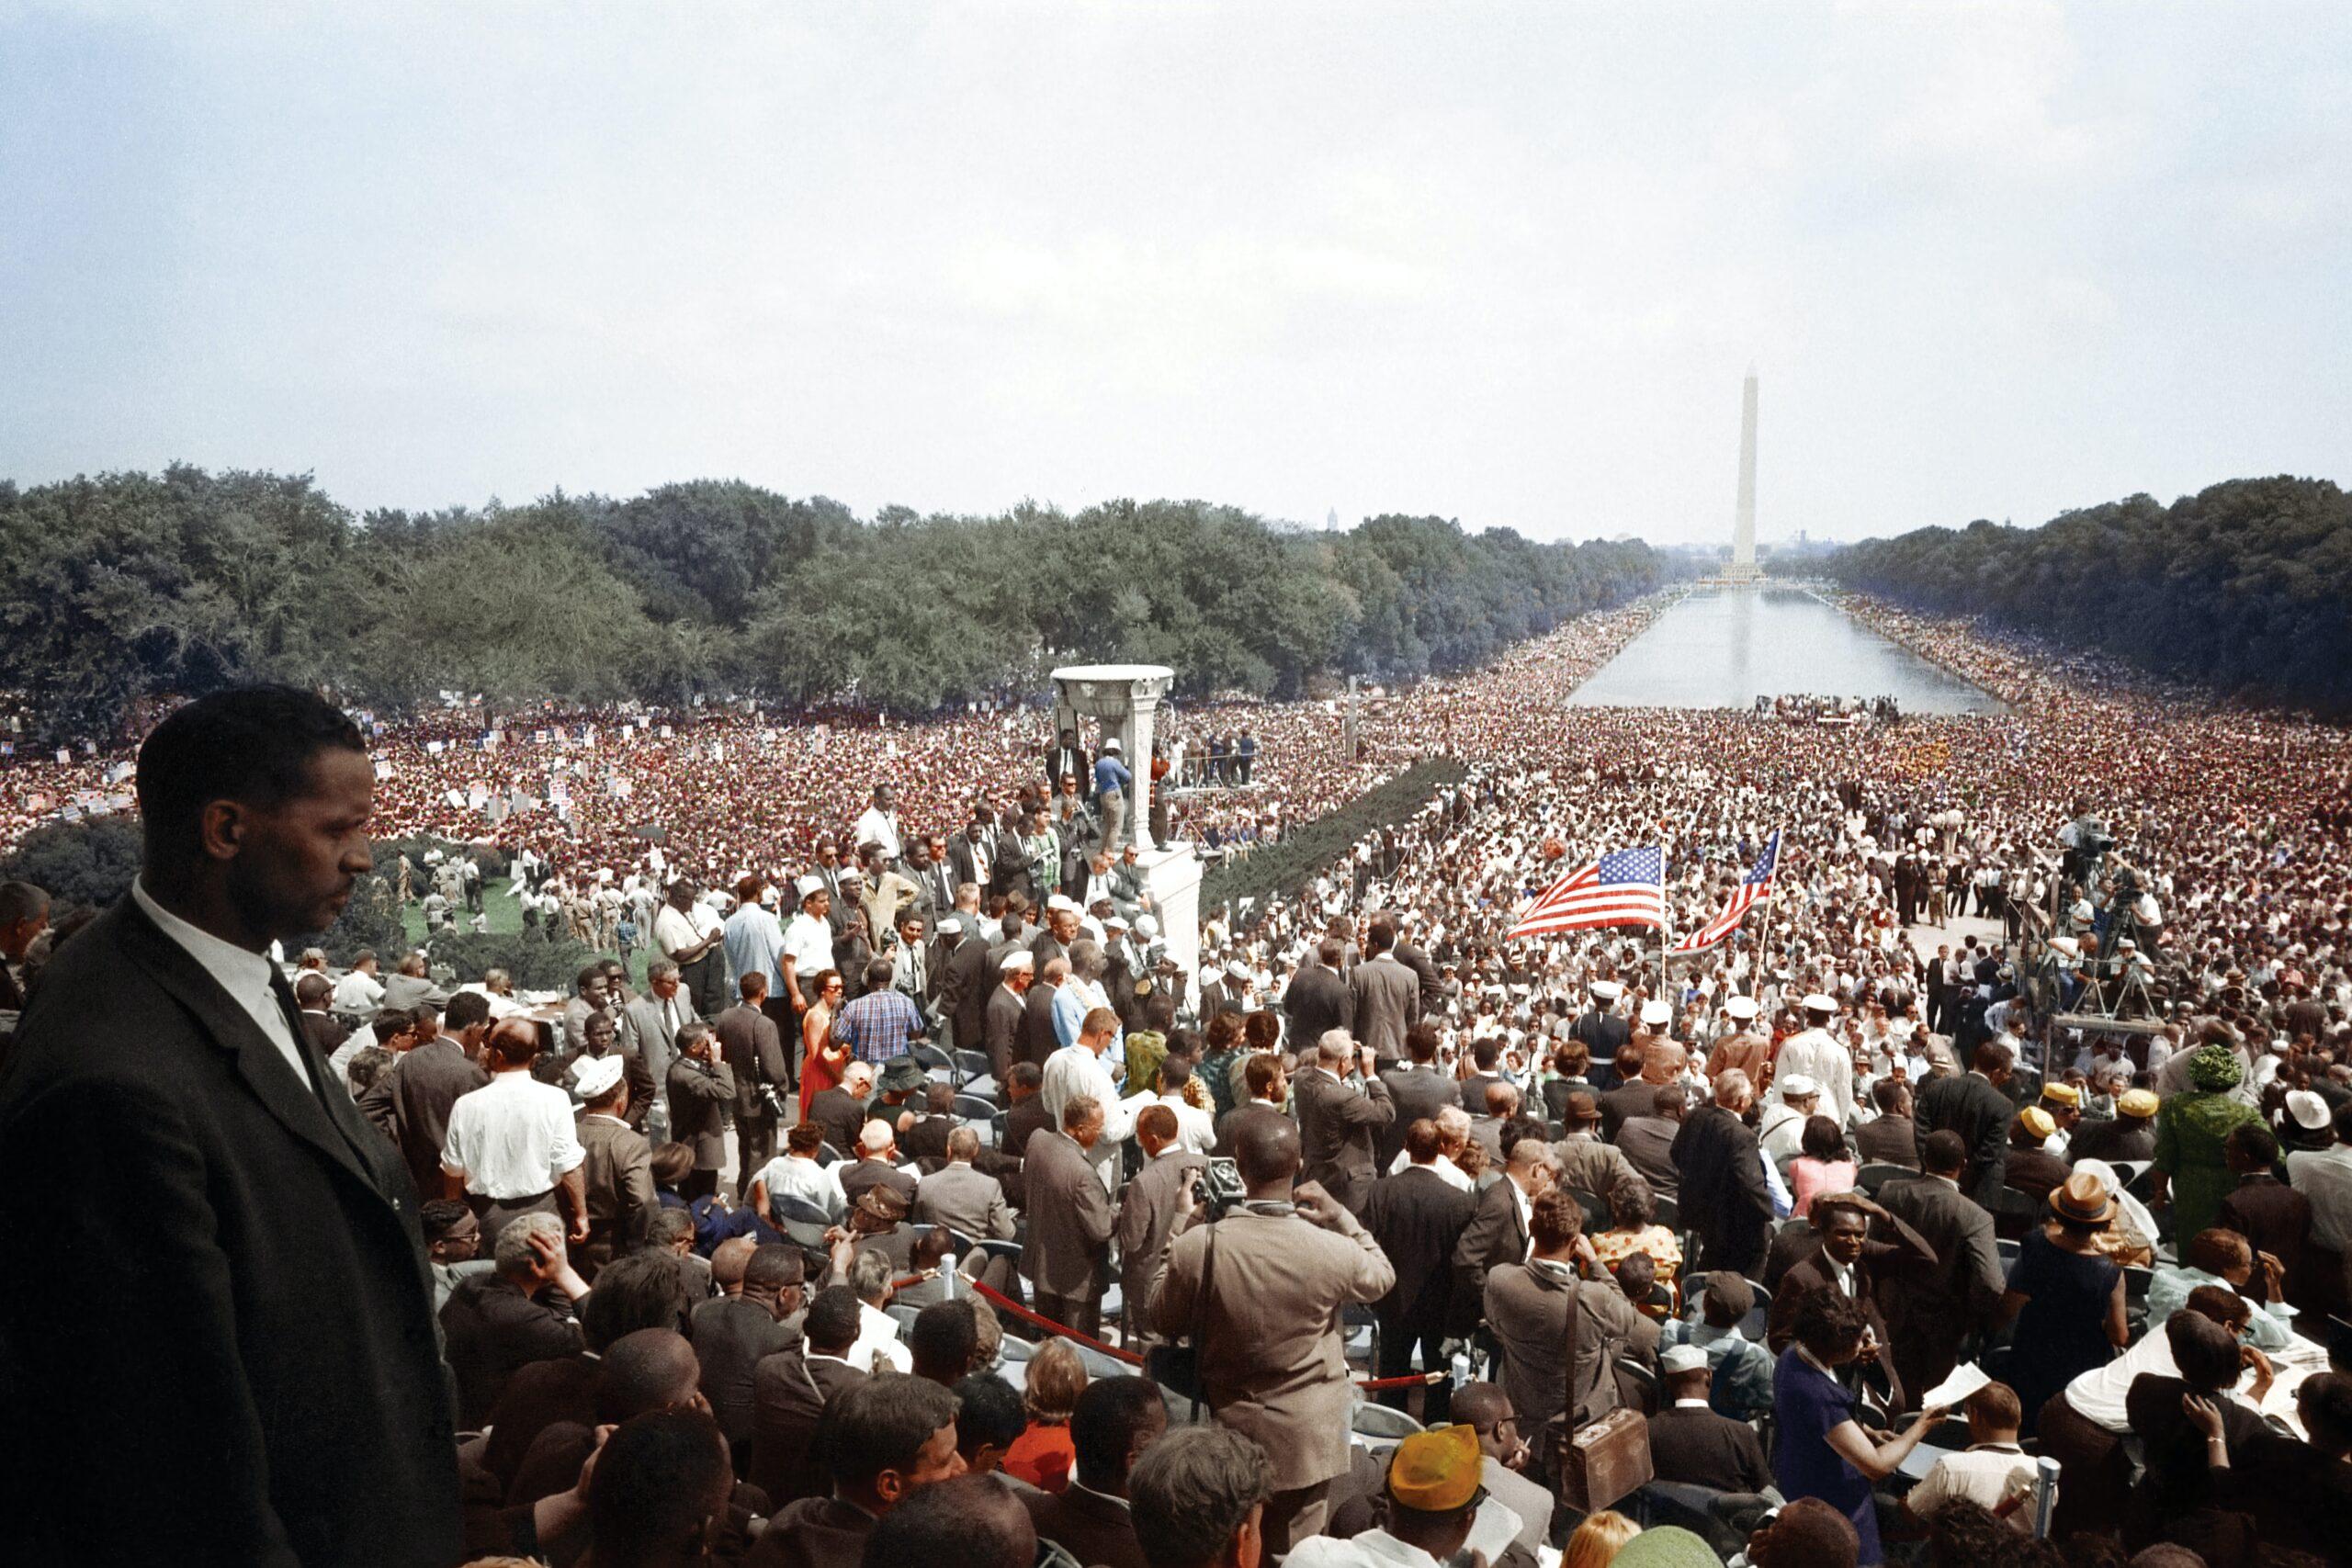 60 Years Later: The March on Washington Echoes Today’s Struggles and Hopes for Black America